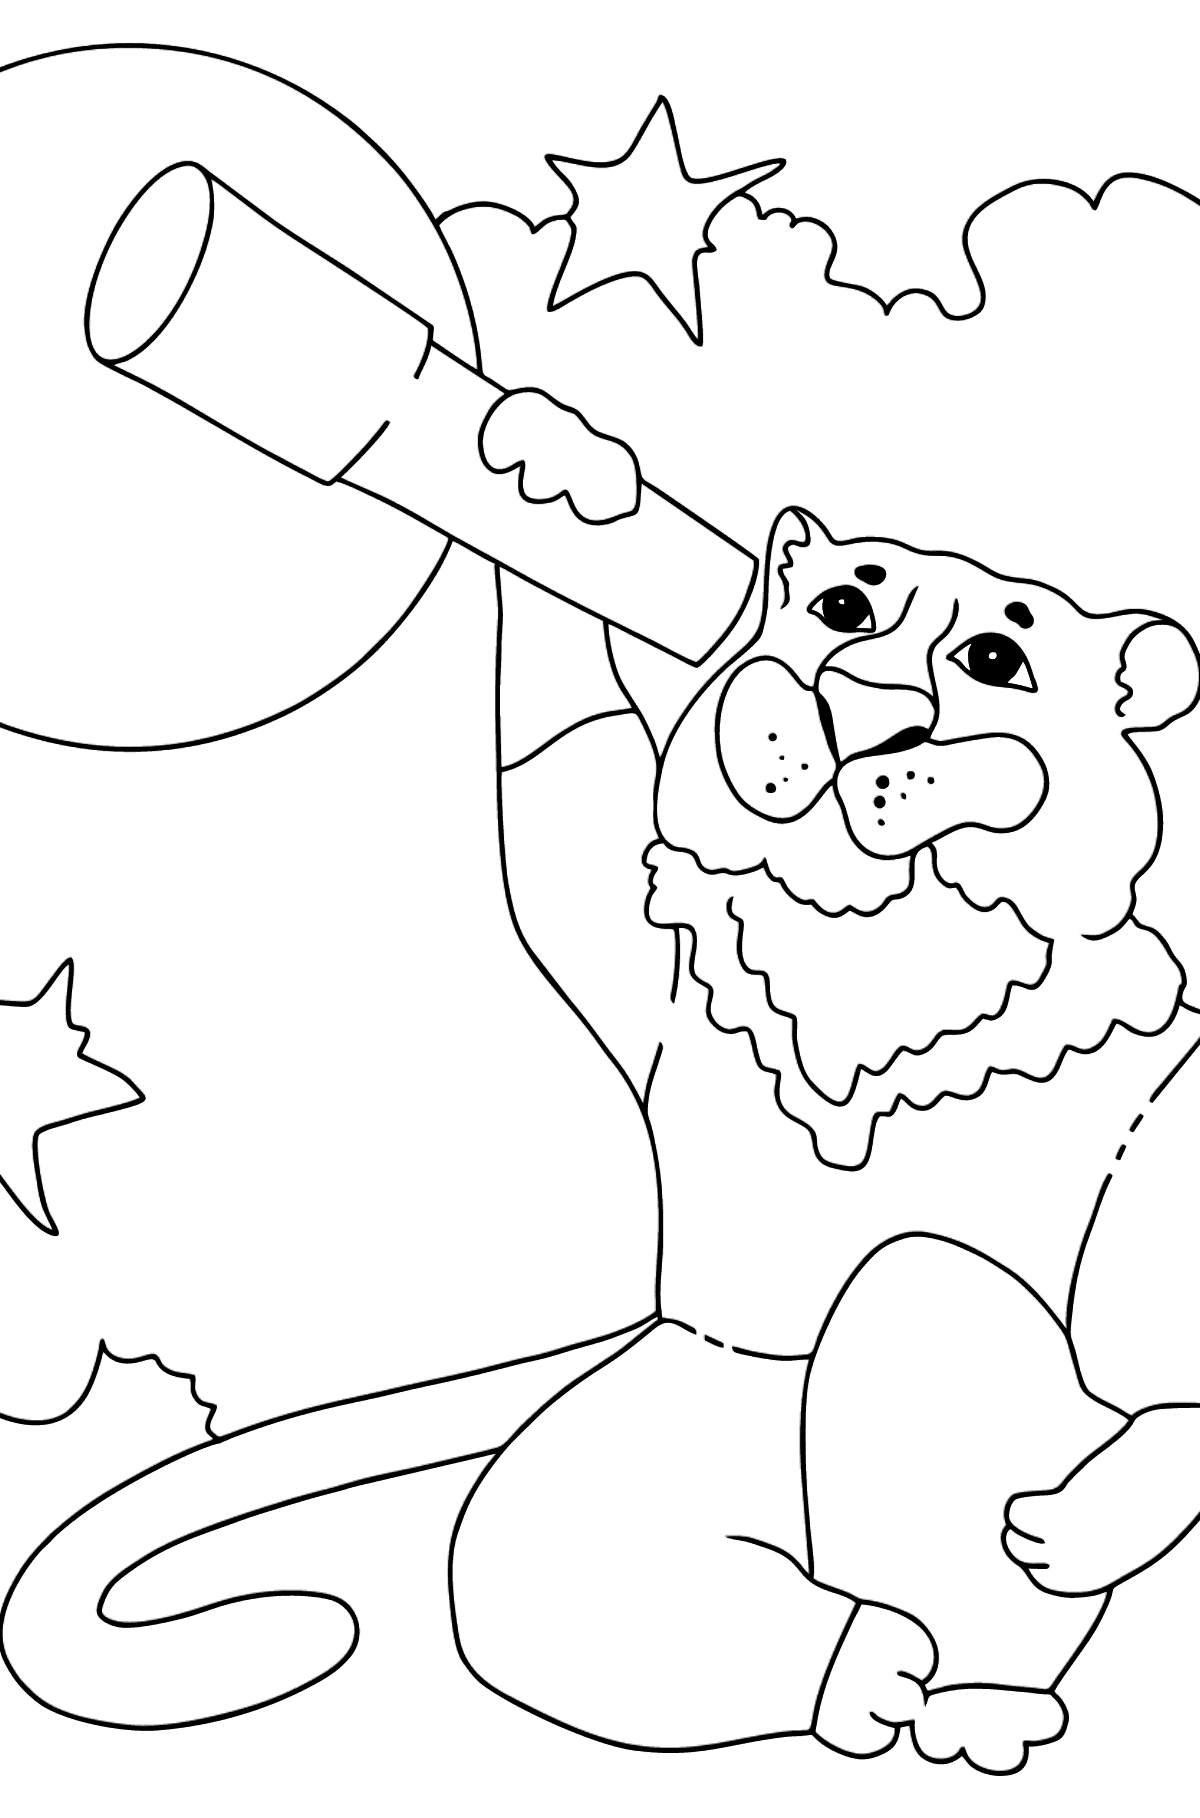 Coloring Page - A Tiger Stargazer - Coloring Pages for Kids